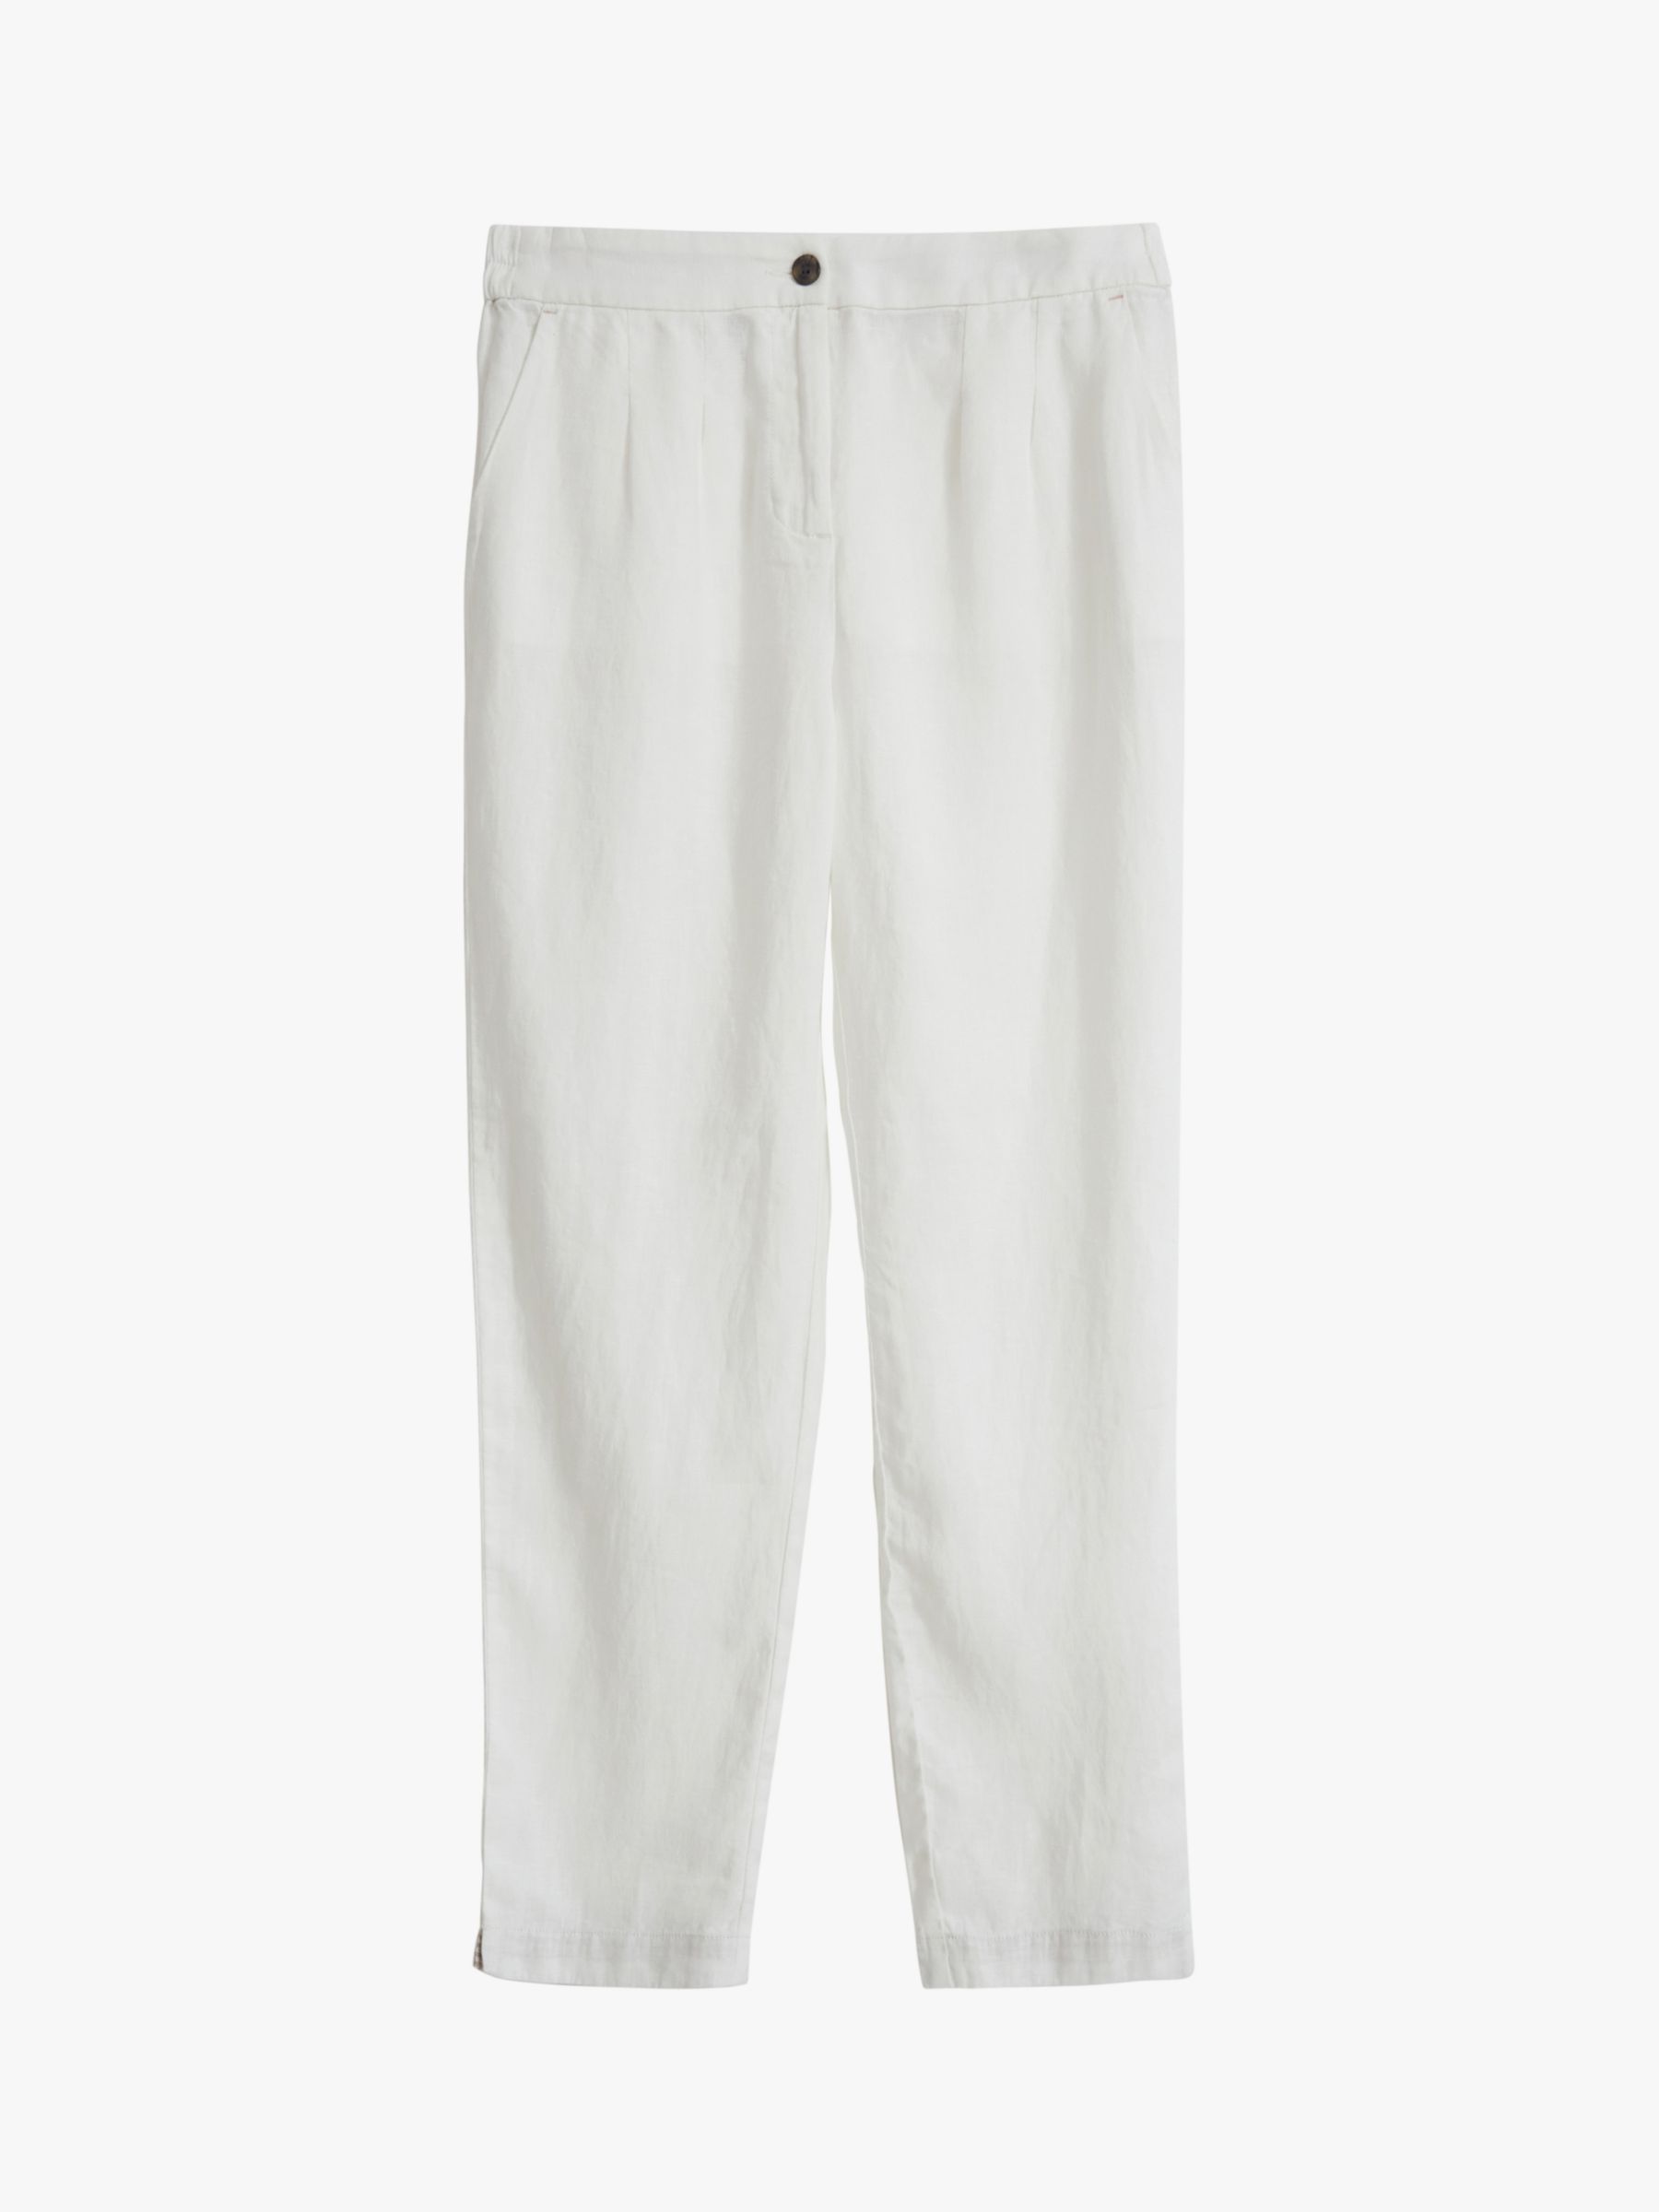 White Stuff Maddie Linen Trousers, White at John Lewis & Partners